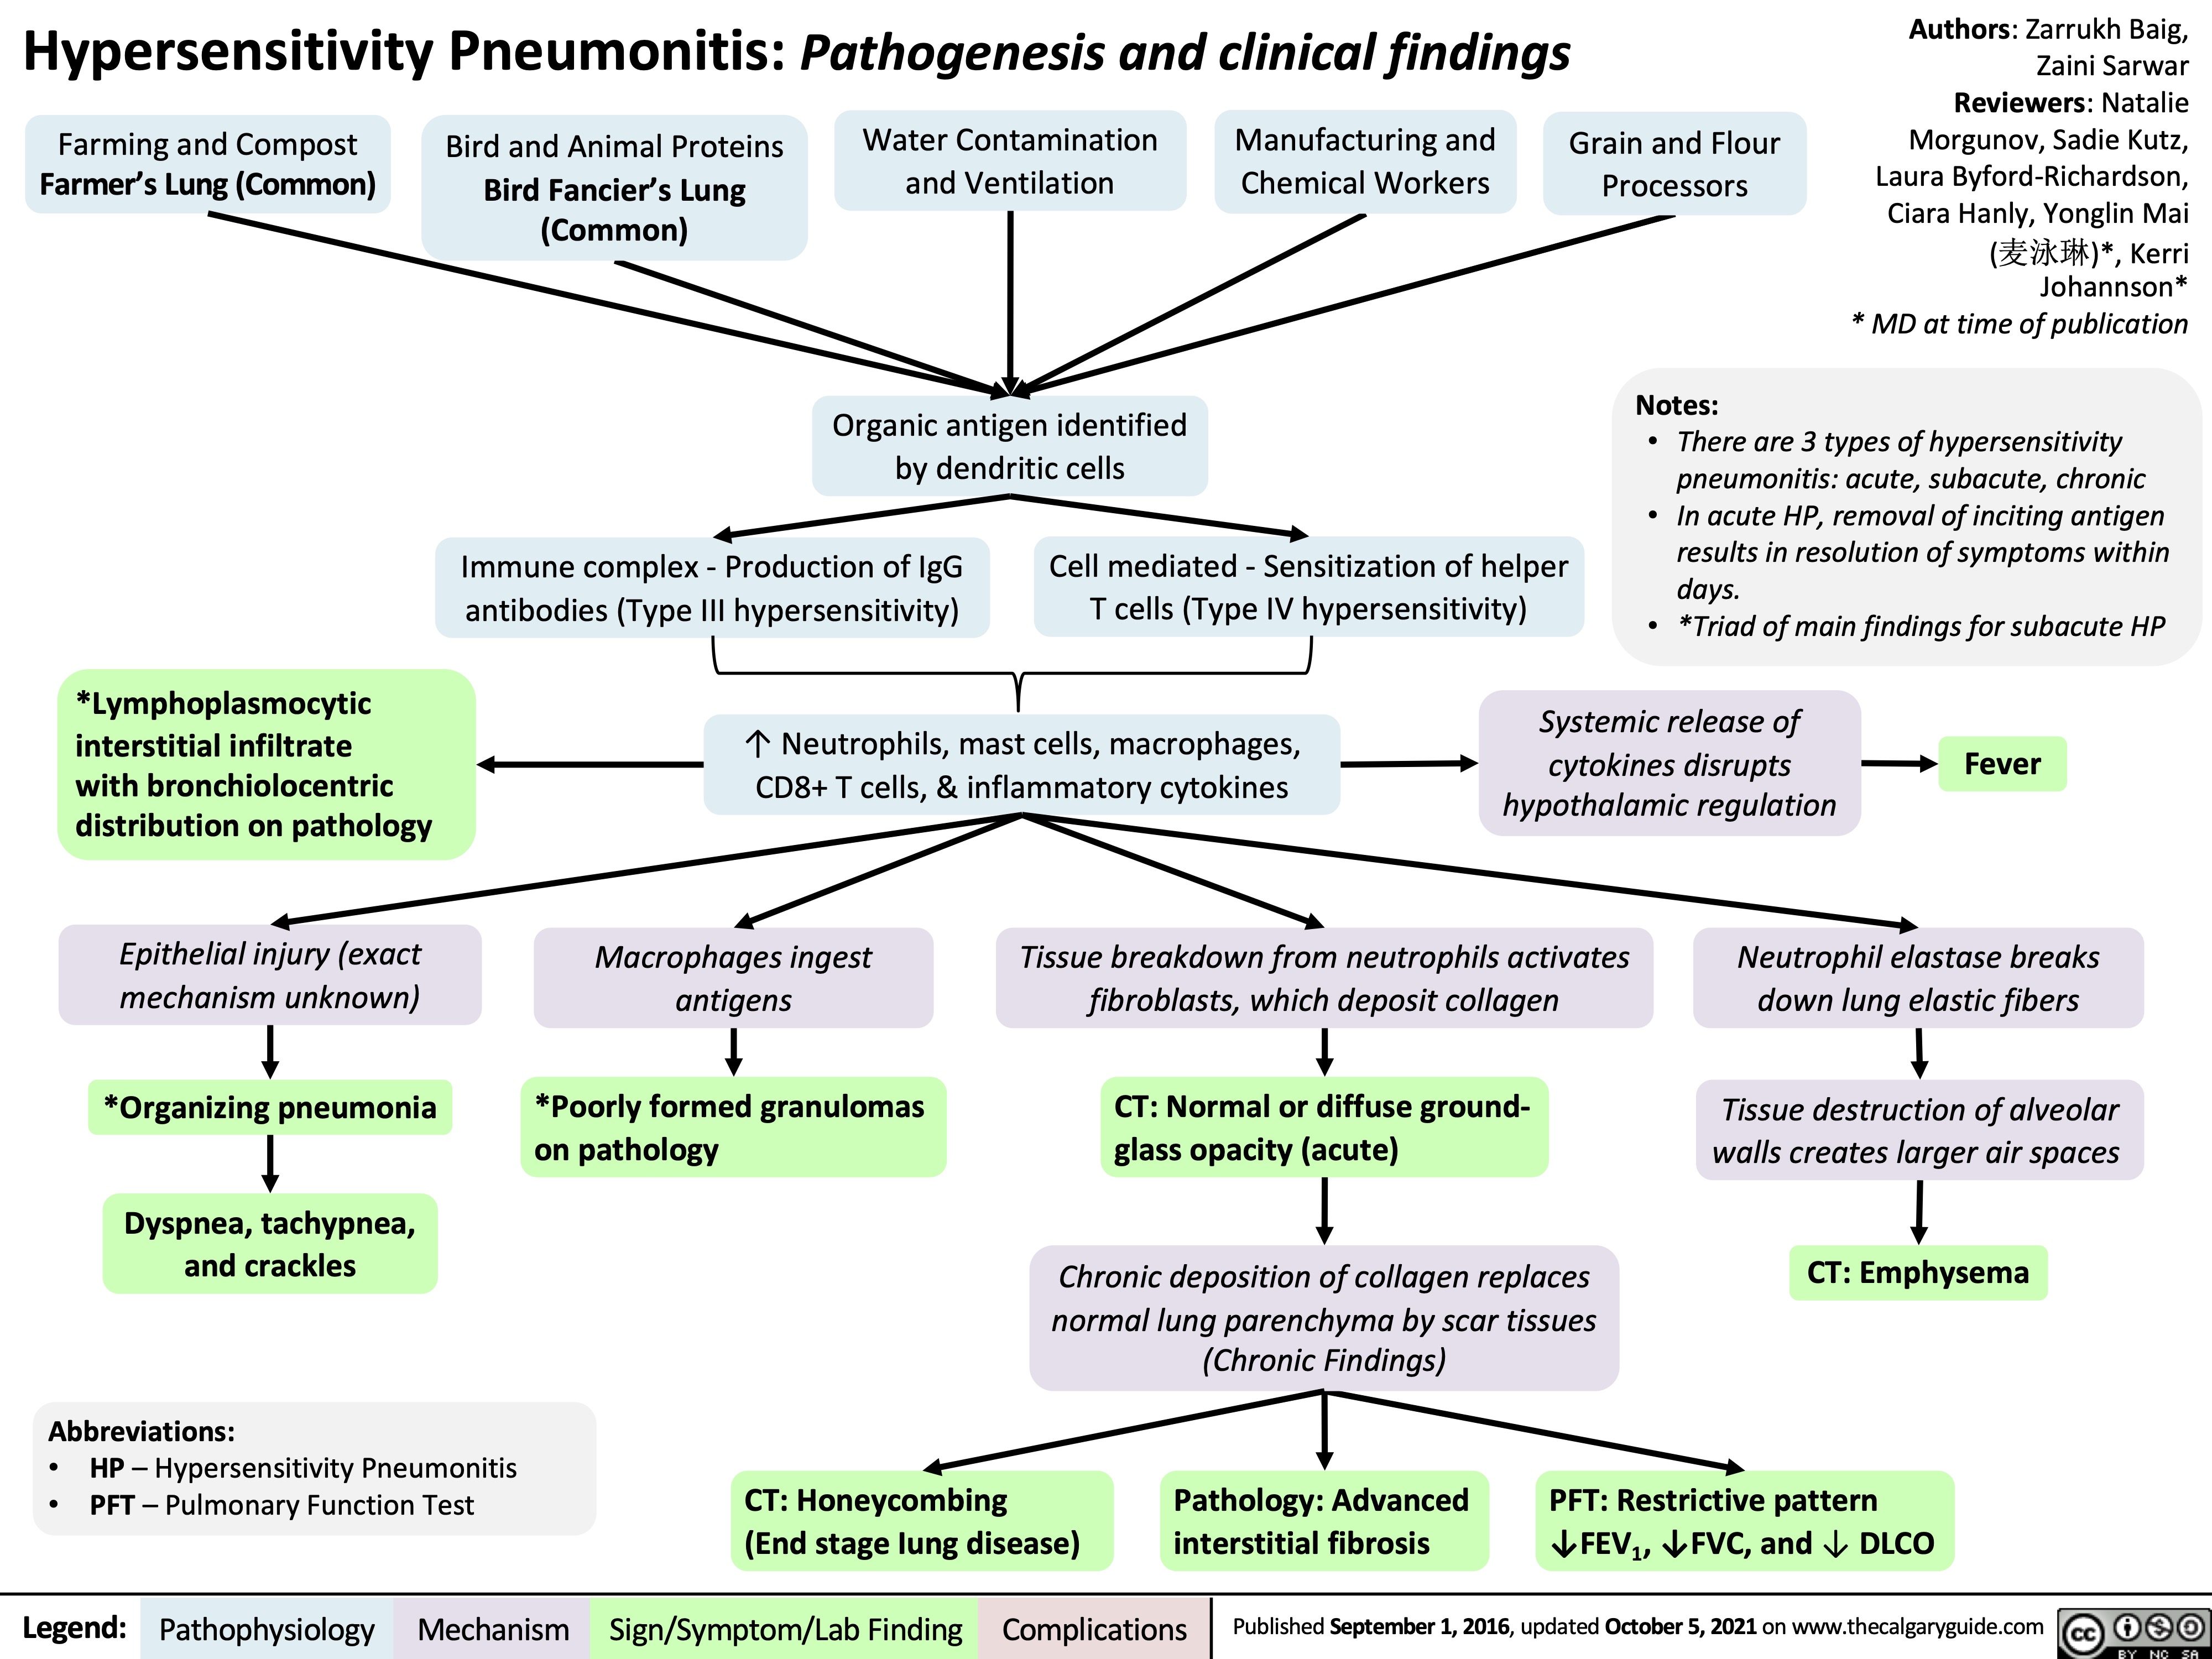 Hypersensitivity Pneumonitis: Pathogenesis and clinical findings
Authors: Zarrukh Baig, Zaini Sarwar Reviewers: Natalie Morgunov, Sadie Kutz, Laura Byford-Richardson, Ciara Hanly, Yonglin Mai (麦泳琳)*, Kerri Johannson* * MD at time of publication
     Farming and Compost
Farmer’s Lung (Common)
Bird and Animal Proteins
Bird Fancier’s Lung (Common)
Water Contamination and Ventilation
Organic antigen identified by dendritic cells
Manufacturing and Chemical Workers
Grain and Flour Processors
Notes:
       Immune complex - Production of IgG antibodies (Type III hypersensitivity)
Cell mediated - Sensitization of helper T cells (Type IV hypersensitivity)
• Thereare3typesofhypersensitivity pneumonitis: acute, subacute, chronic
• InacuteHP,removalofincitingantigen results in resolution of symptoms within days.
  *Lymphoplasmocytic interstitial infiltrate
with bronchiolocentric distribution on pathology
Epithelial injury (exact mechanism unknown)
*Organizing pneumonia
Dyspnea, tachypnea, and crackles
Abbreviations:
• HP – Hypersensitivity Pneumonitis
• PFT – Pulmonary Function Test
↑ Neutrophils, mast cells, macrophages, CD8+ T cells, & inflammatory cytokines
• *TriadofmainfindingsforsubacuteHP Systemic release of
   cytokines disrupts hypothalamic regulation
Fever
        Macrophages ingest antigens
*Poorly formed granulomas on pathology
Tissue breakdown from neutrophils activates fibroblasts, which deposit collagen
CT: Normal or diffuse ground- glass opacity (acute)
Chronic deposition of collagen replaces normal lung parenchyma by scar tissues (Chronic Findings)
Neutrophil elastase breaks down lung elastic fibers
Tissue destruction of alveolar walls creates larger air spaces
CT: Emphysema
             CT: Honeycombing
(End stage Iung disease)
Pathology: Advanced interstitial fibrosis
PFT: Restrictive pattern ↓FEV1, ↓FVC, and ↓ DLCO
 Legend:
 Pathophysiology
 Mechanism
Sign/Symptom/Lab Finding
 Complications
 Published September 1, 2016, updated October 5, 2021 on www.thecalgaryguide.com
  